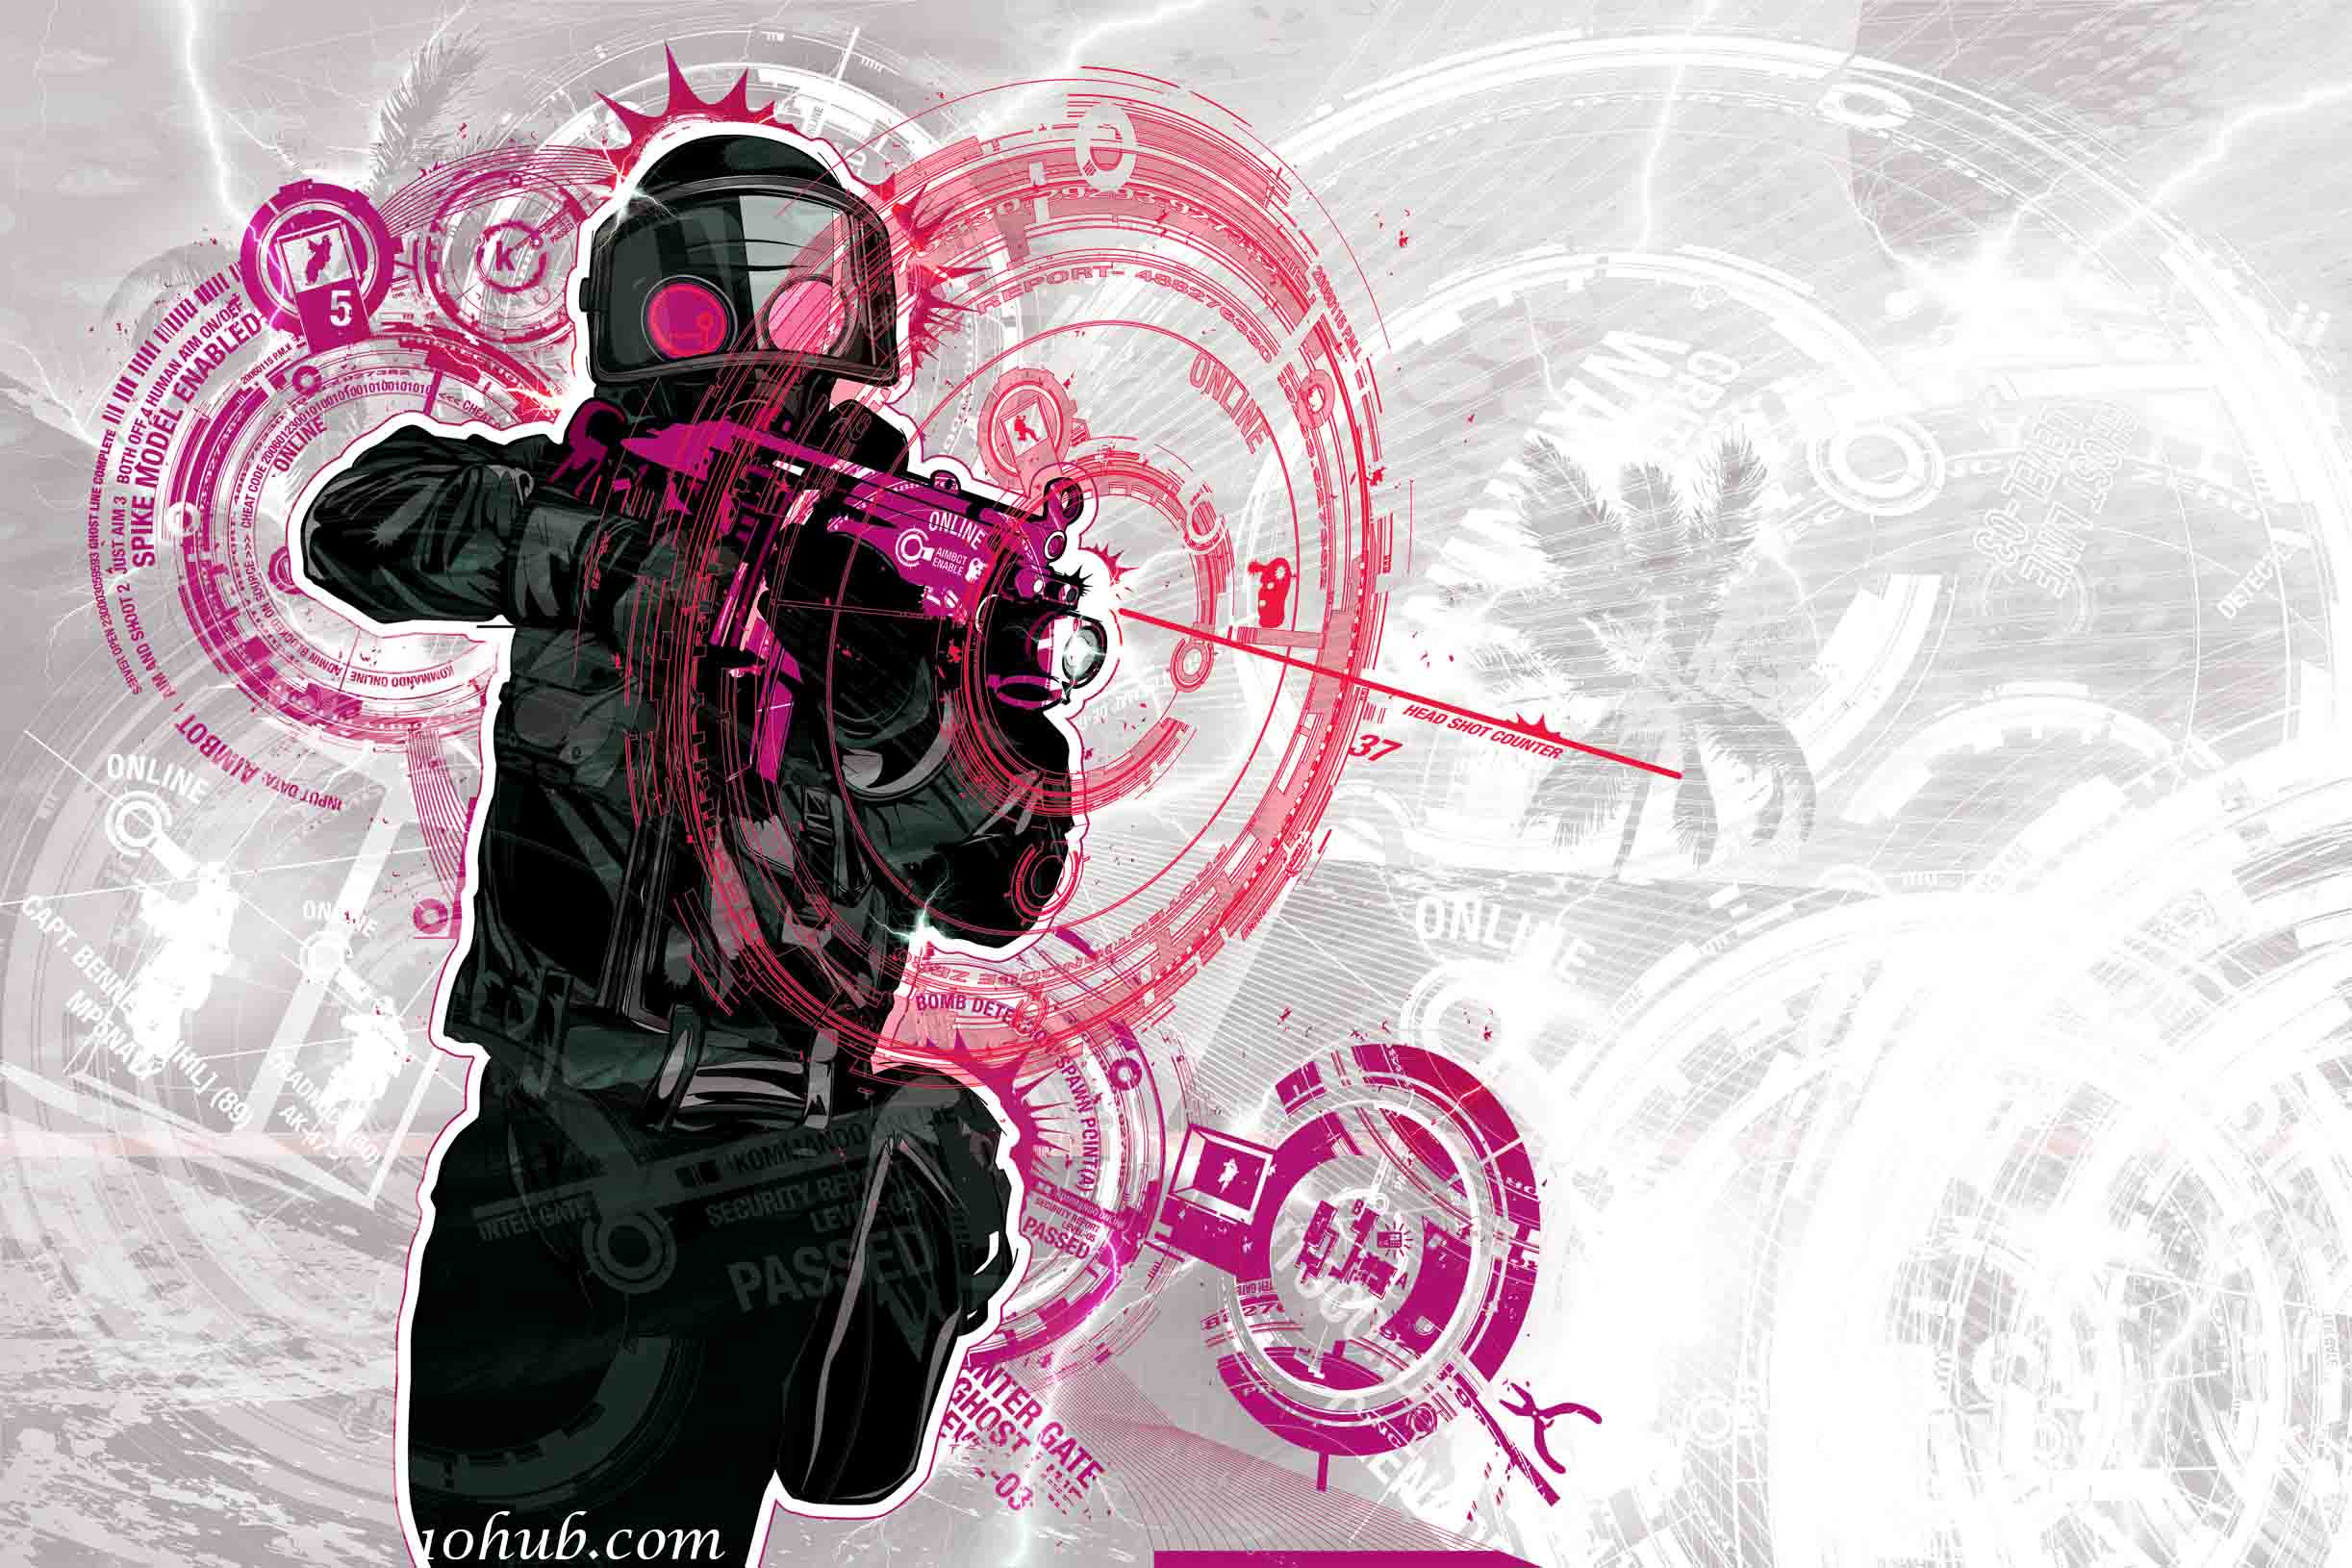 cs wallpapers,graphic design,pink,illustration,fictional character,art